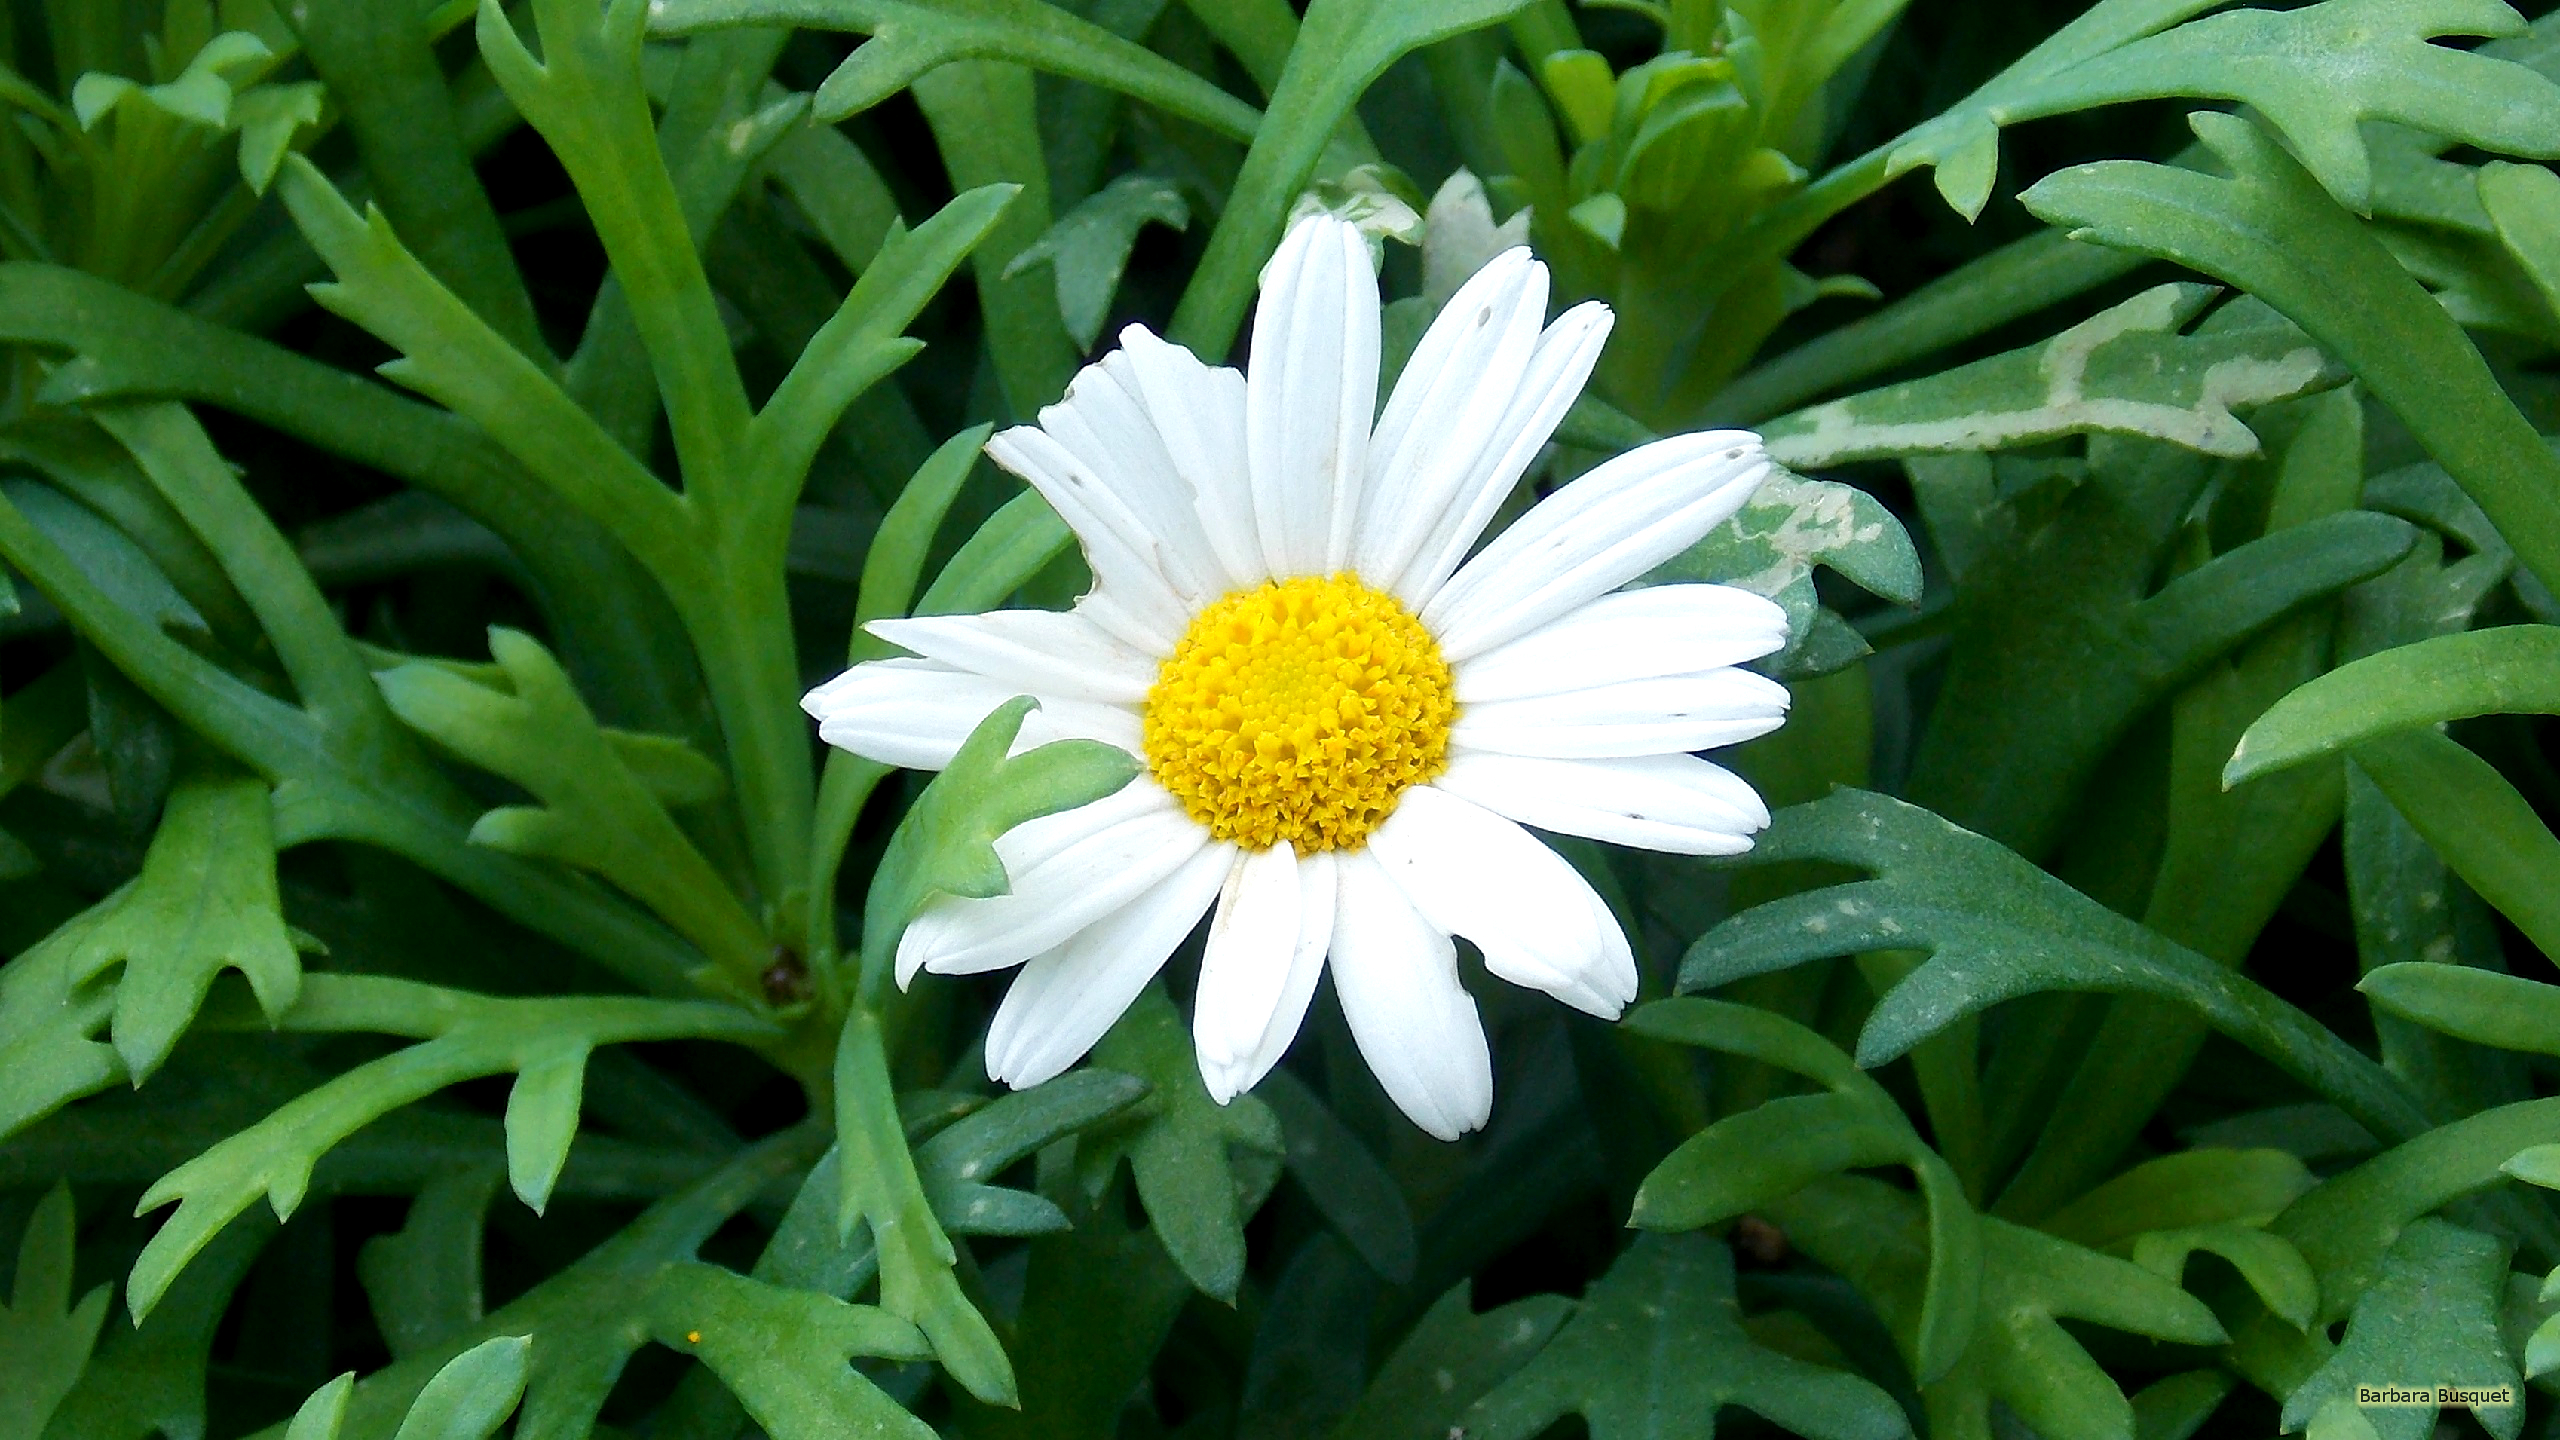 Flower Wallpaper With A Close Up Photo Of Marguerite Daisy